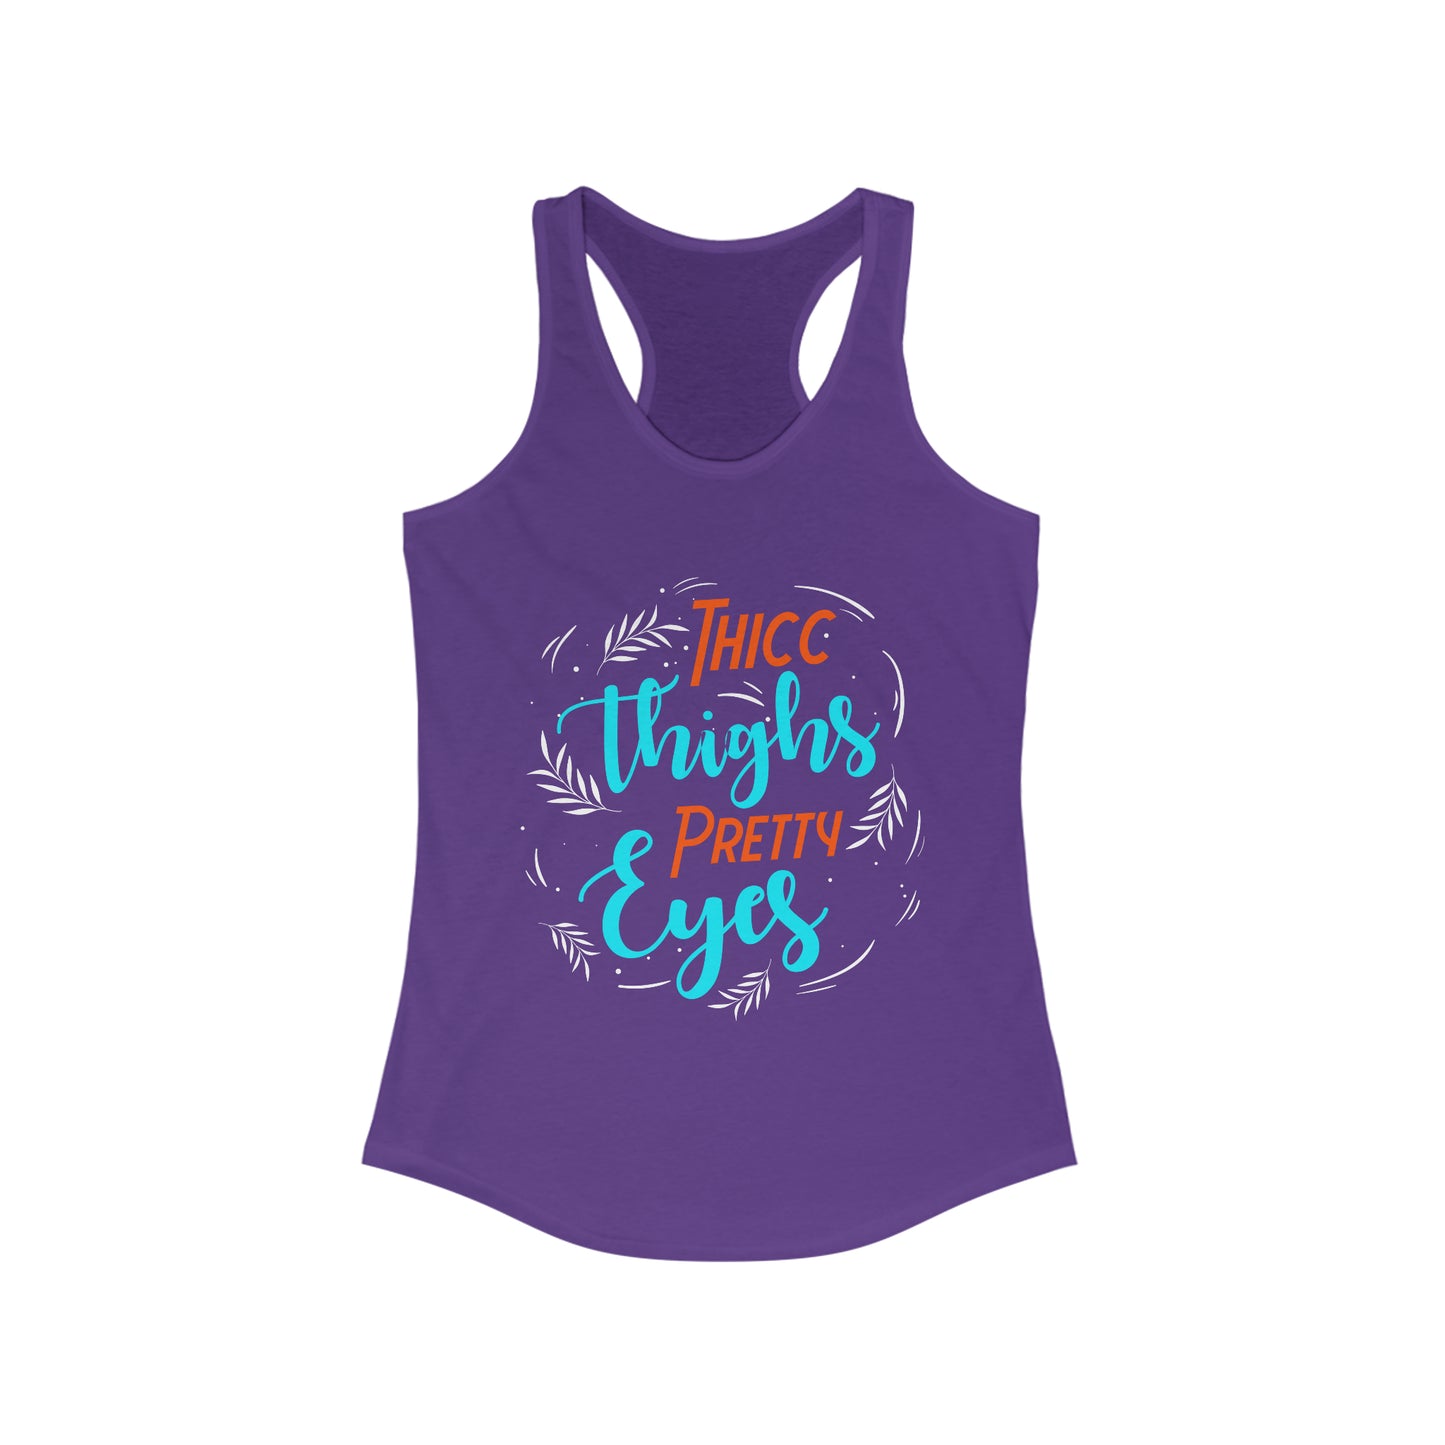 Thicc Thighs Pretty Eyes Women's Ideal Racerback Tank for fitness gym & every day wear